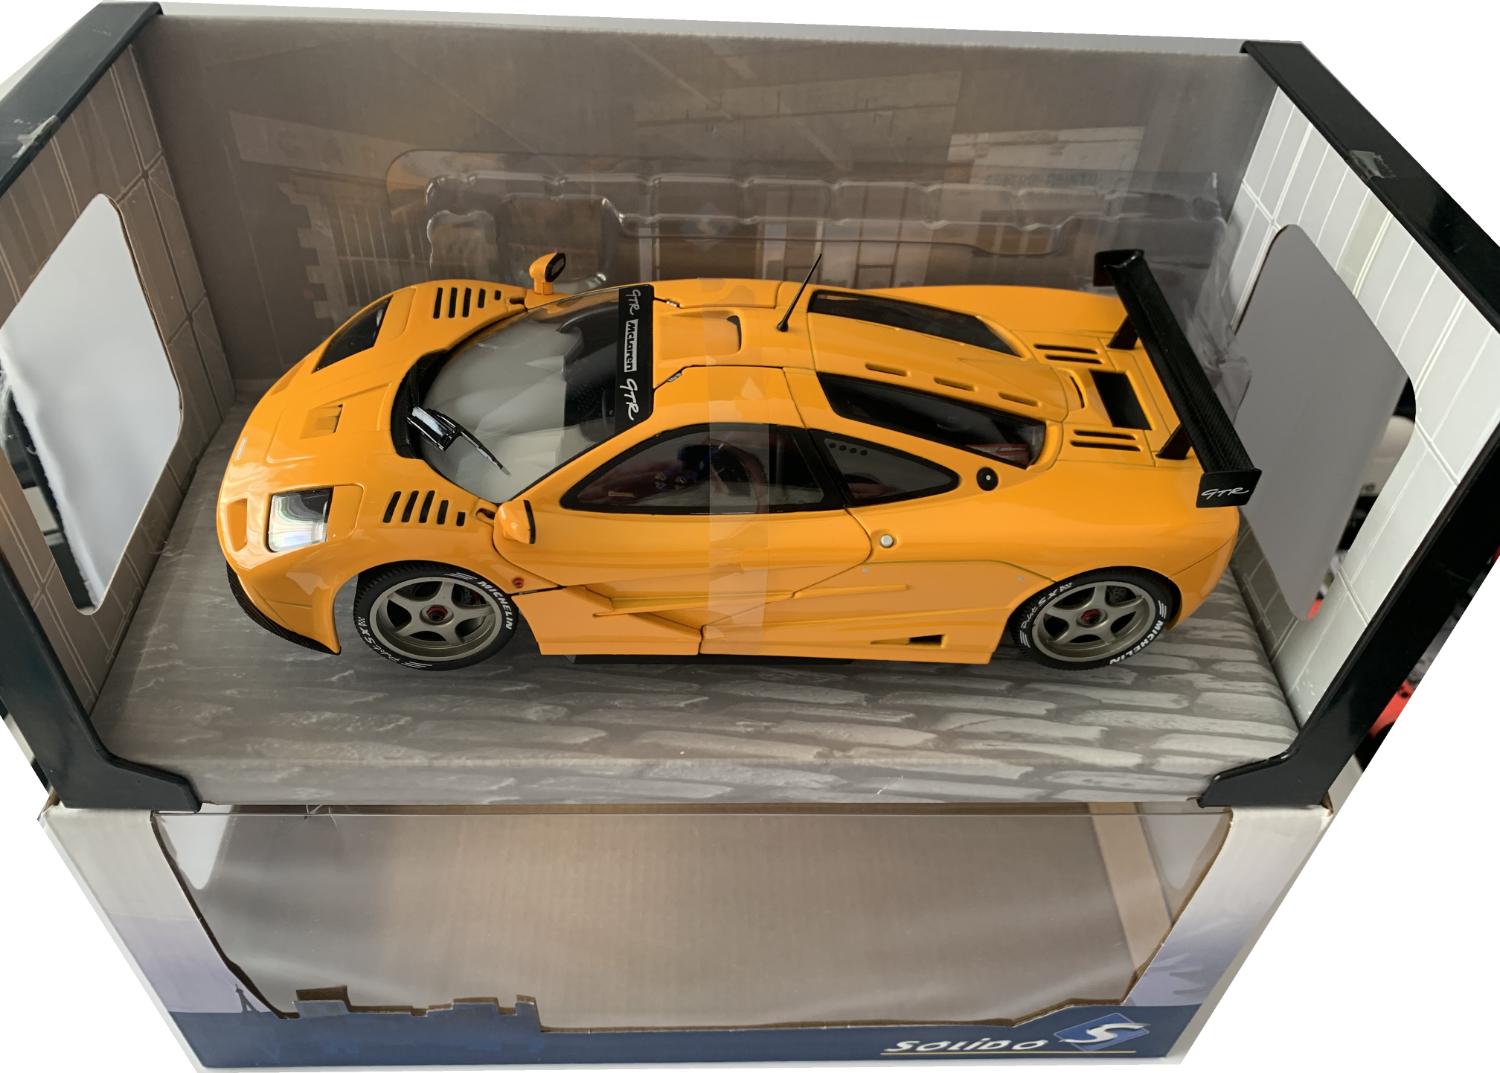 very good representation of the McLaren F1 GTR decorated in orange papaya with authentic graphics and high rear spoiler.